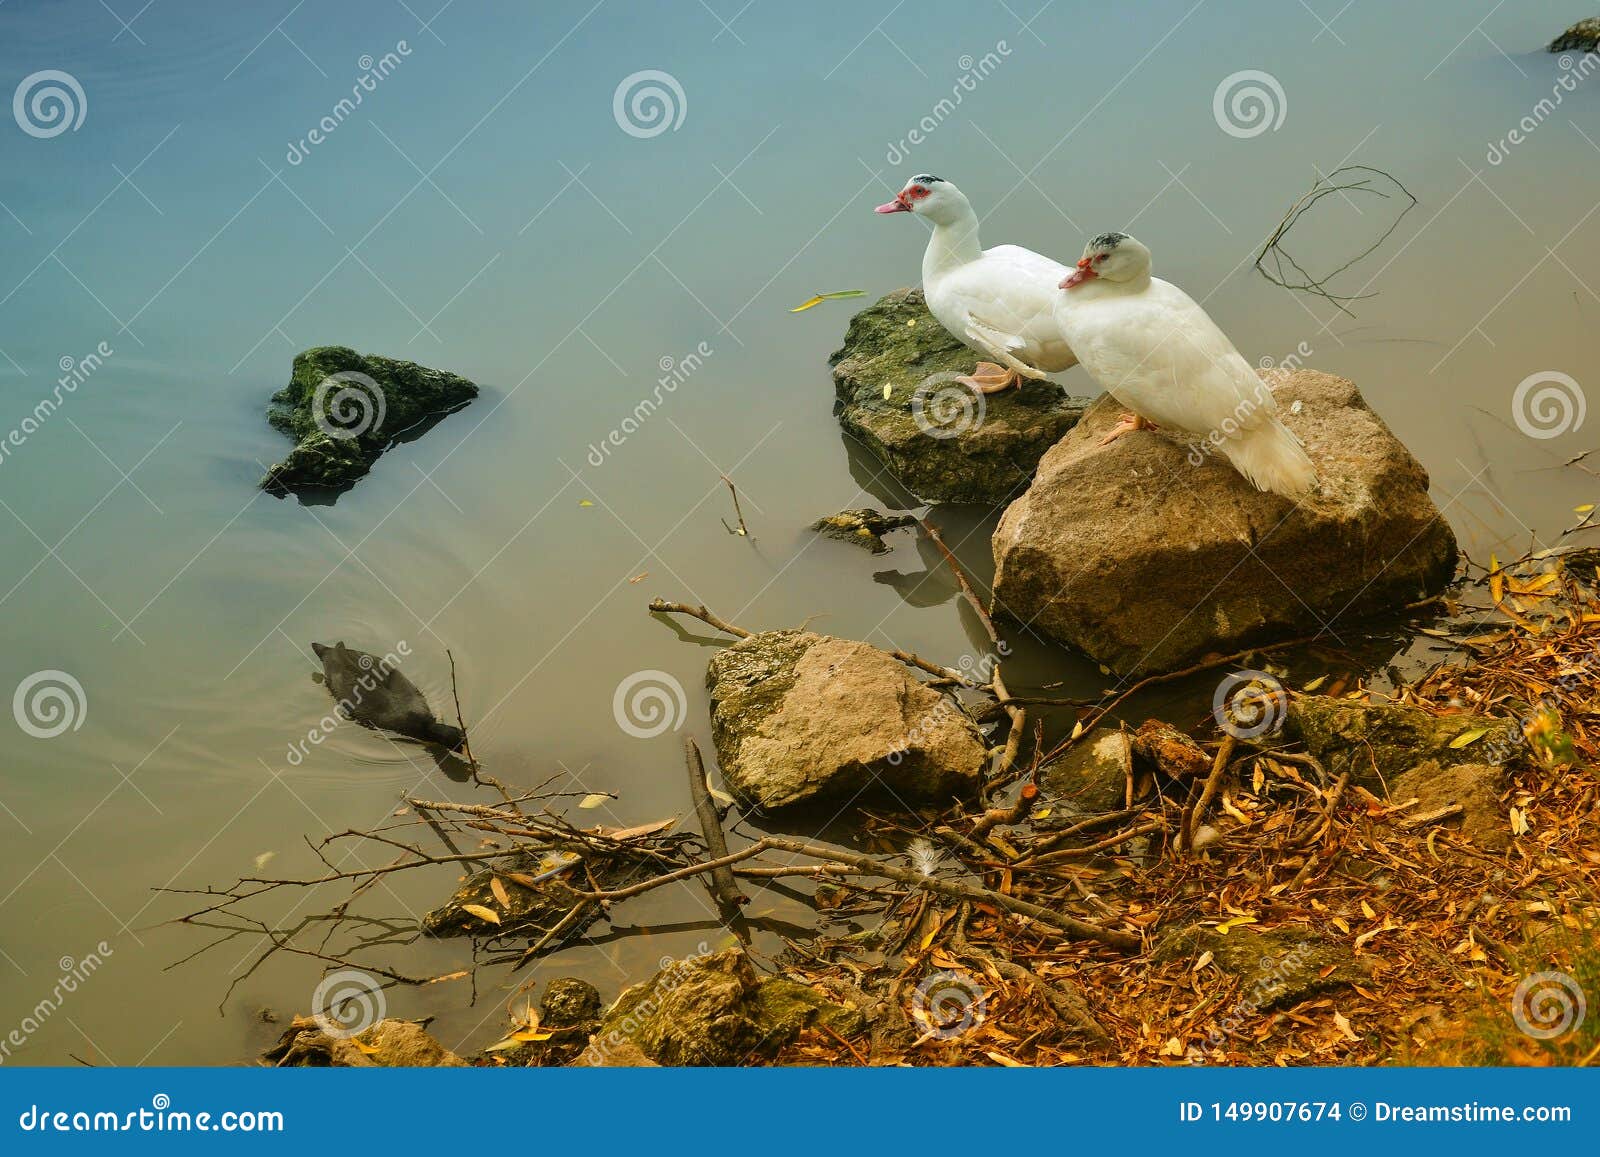 two beautiful ducks on the shore of the lake